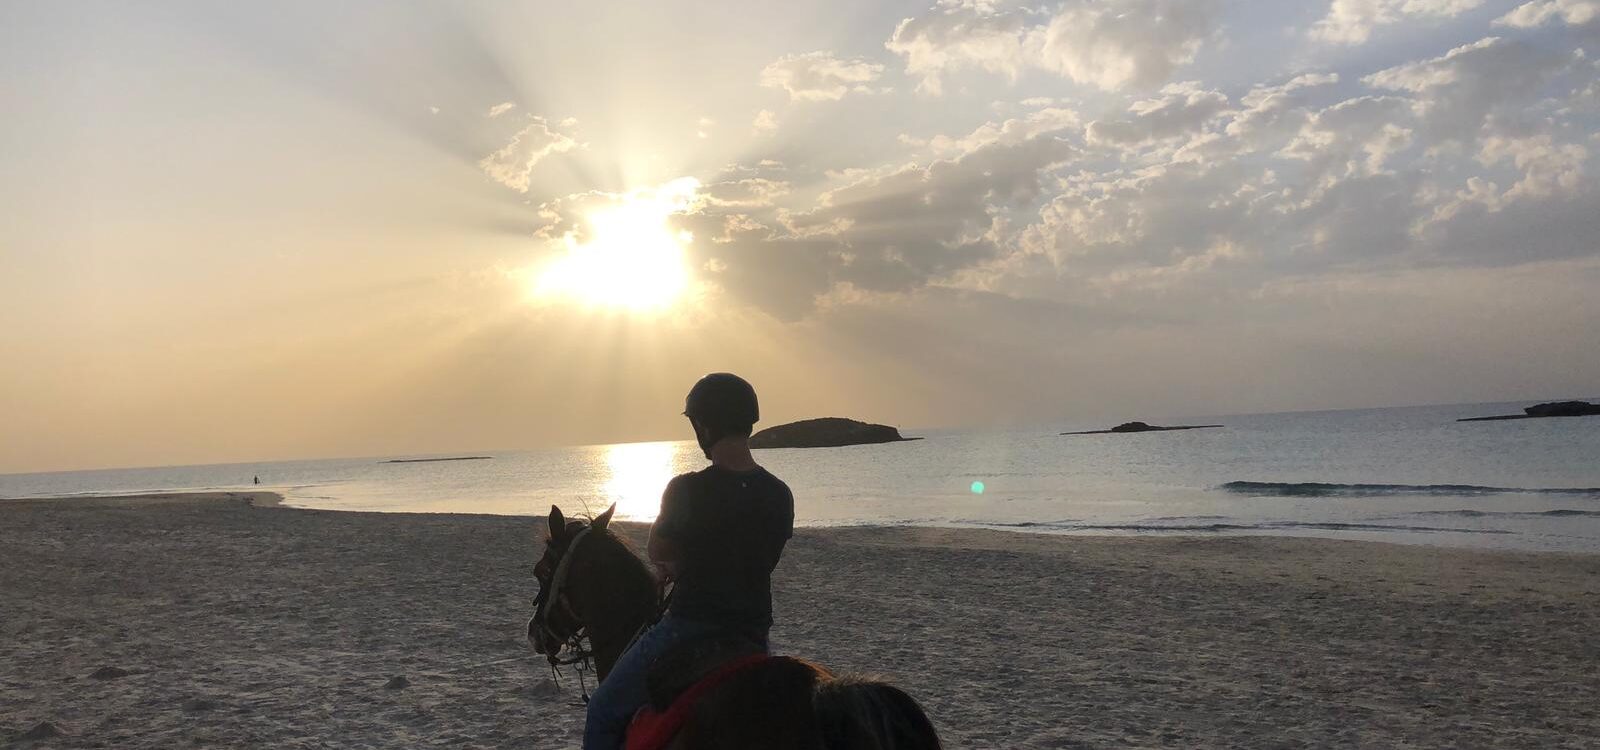 Riding on the beach in Israel